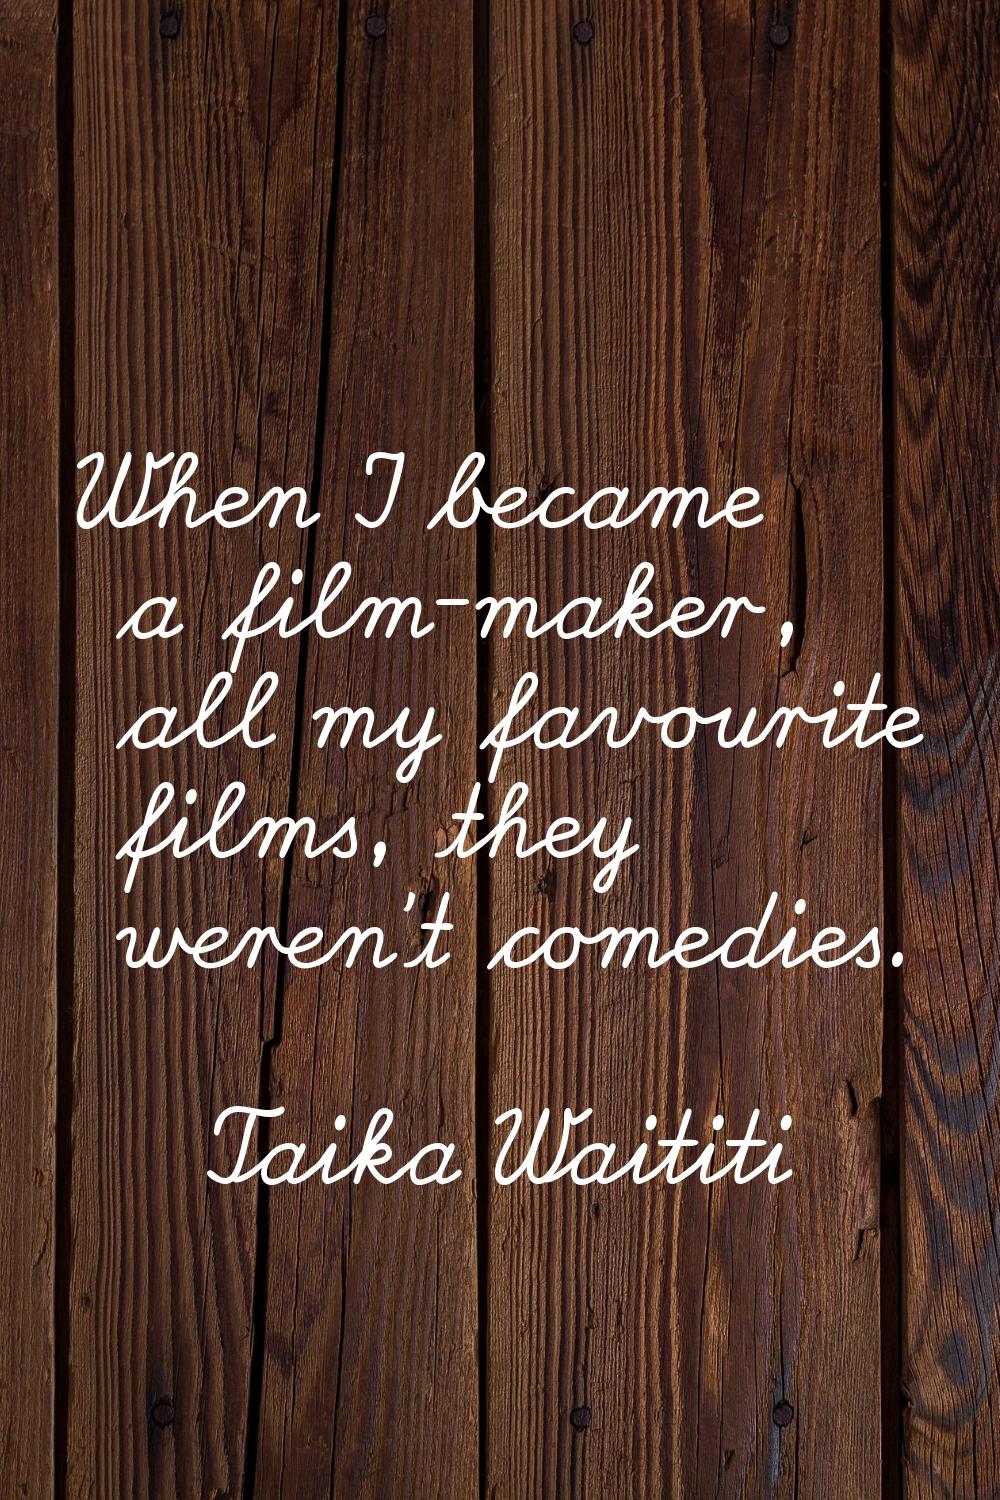 When I became a film-maker, all my favourite films, they weren't comedies.